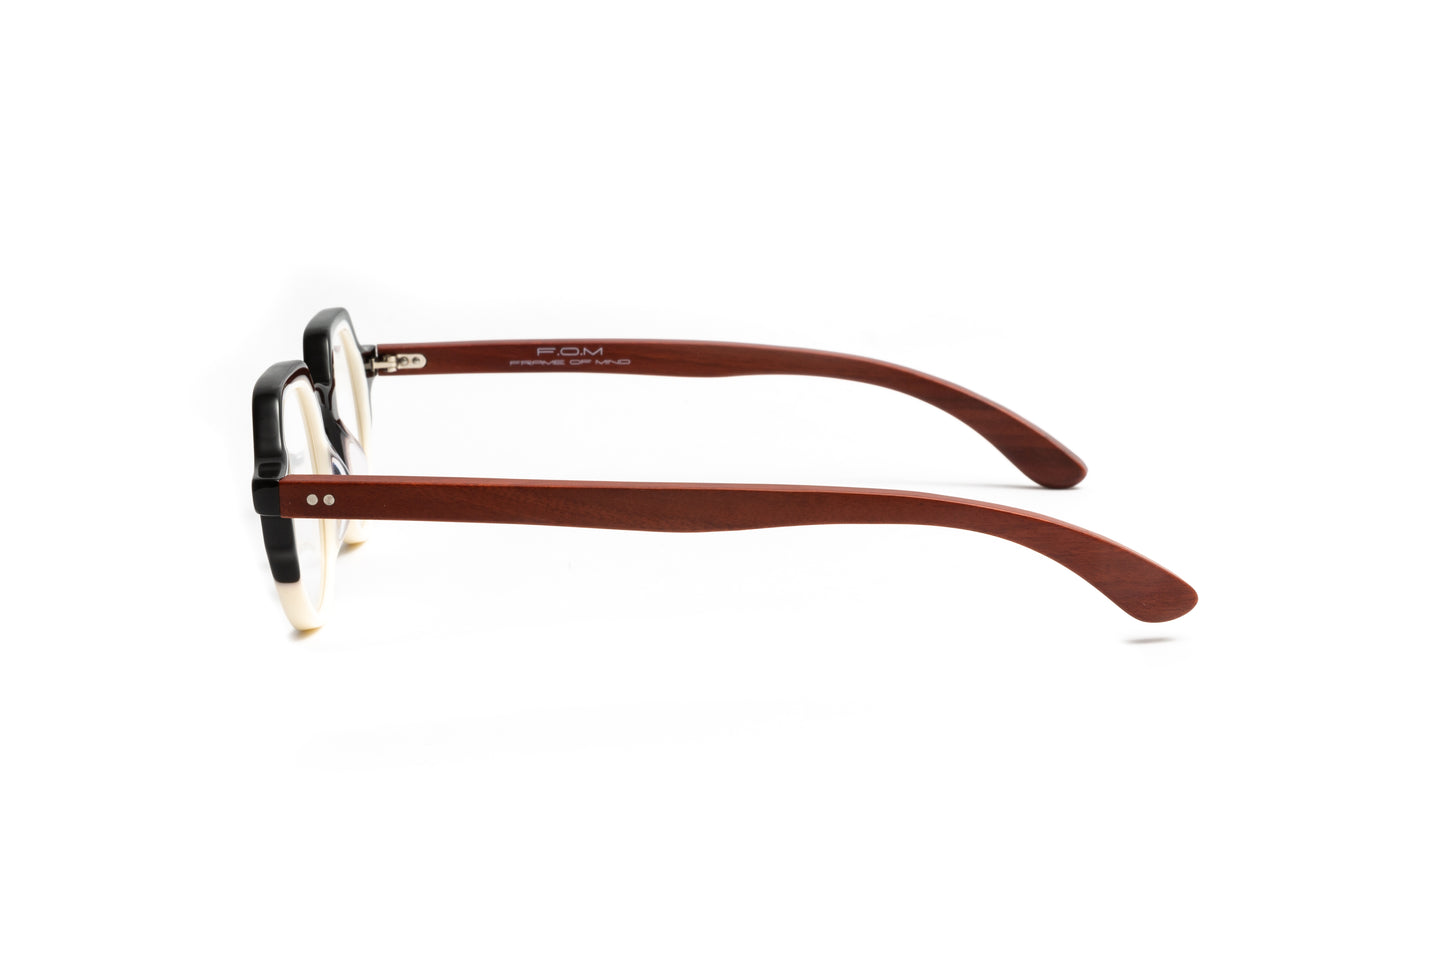 St Tropez unisex round readers with black and ivory acetate and cherry wood temples by Eyejets